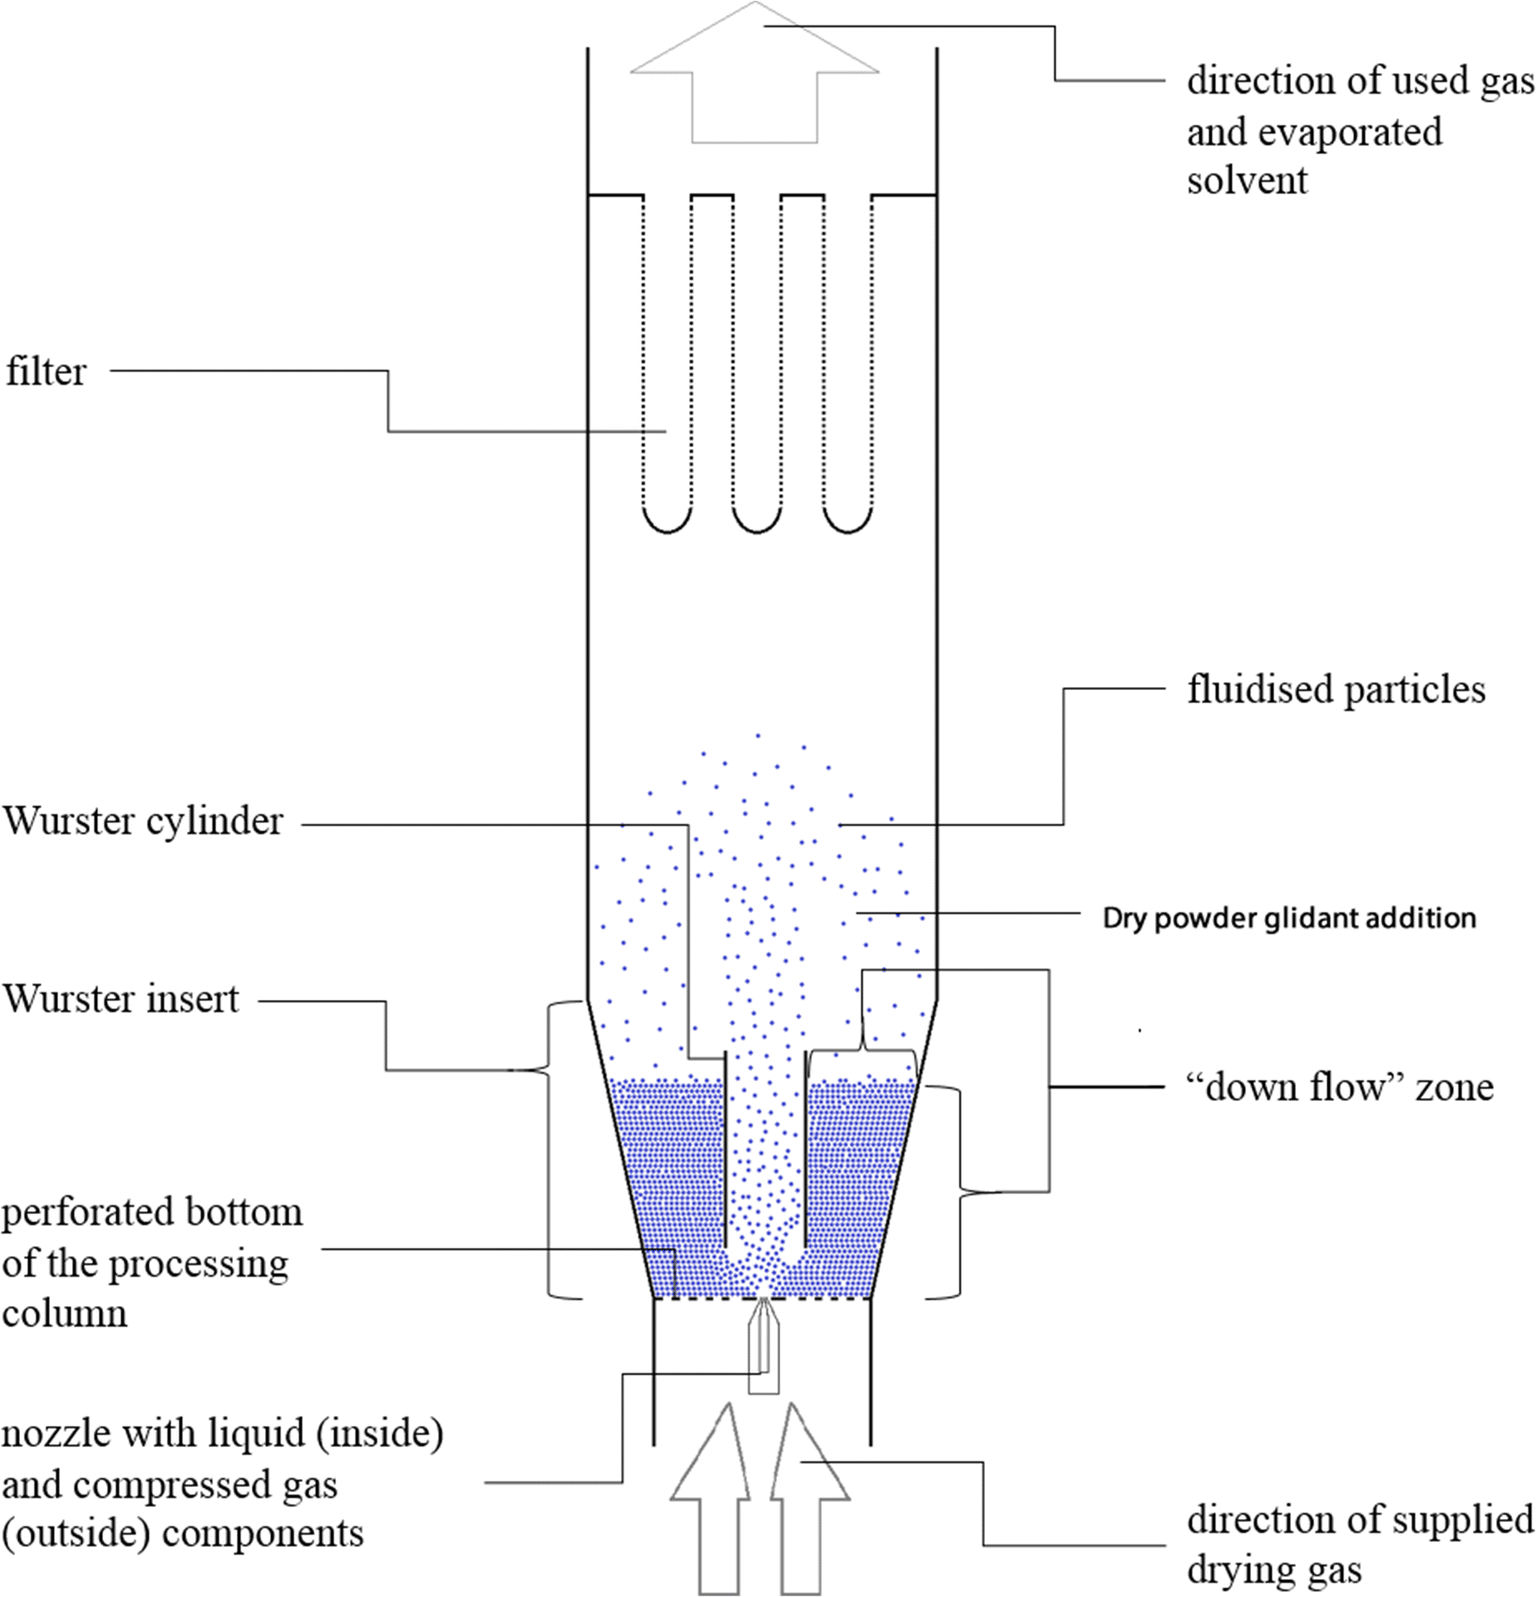 Schematic illustration of Wurster fluidised bed coating process